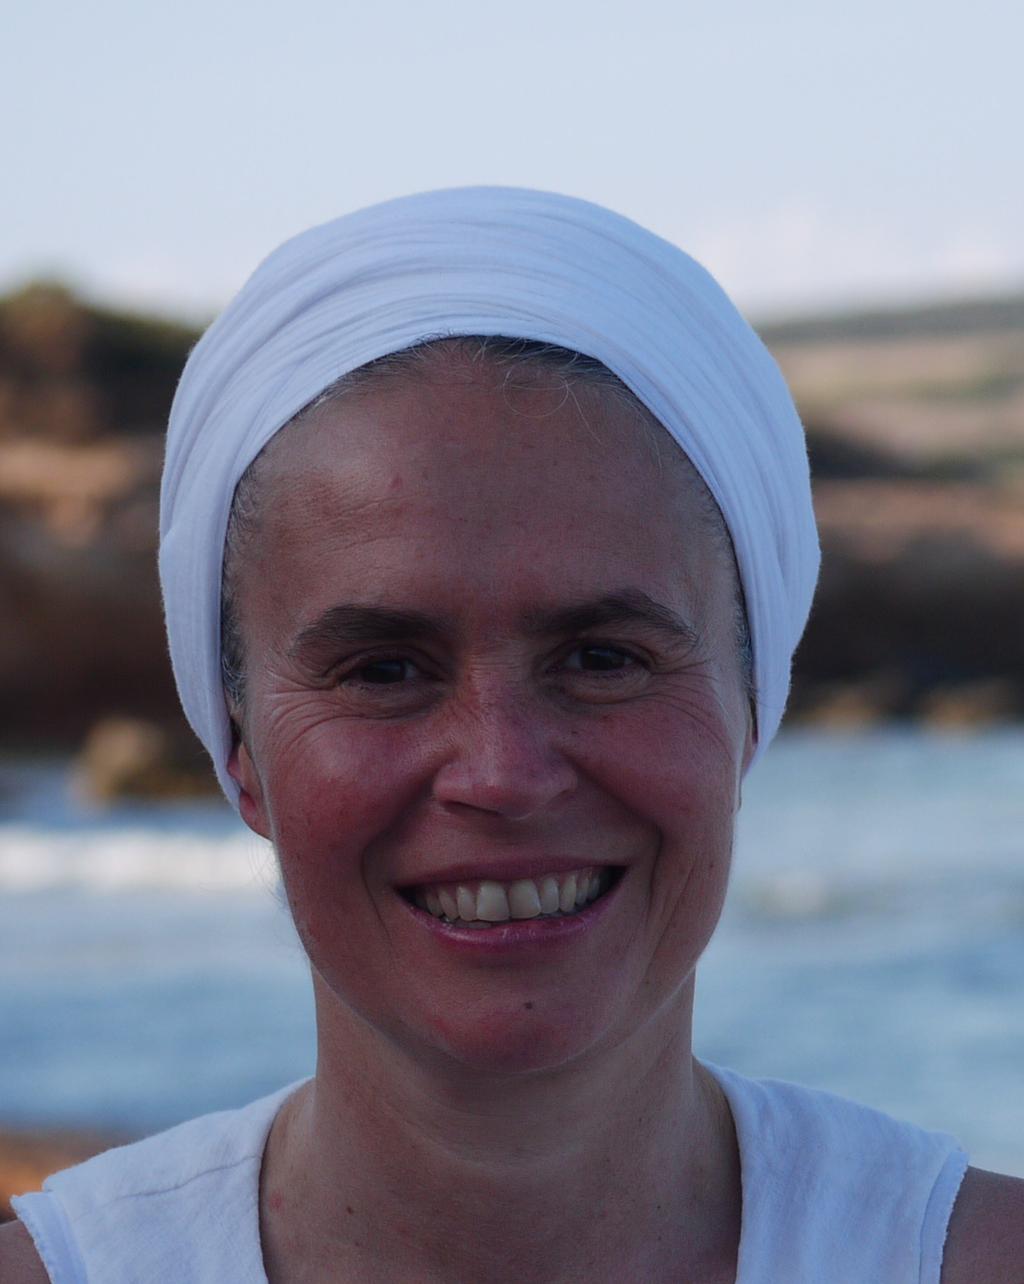 our presence. Satwant currently teaches on several programs in the UK and internationally. Guru Darshan Kaur lives in Hamburg and founded the DEVAH Yoga Center in St Pauli which she led until 2014.